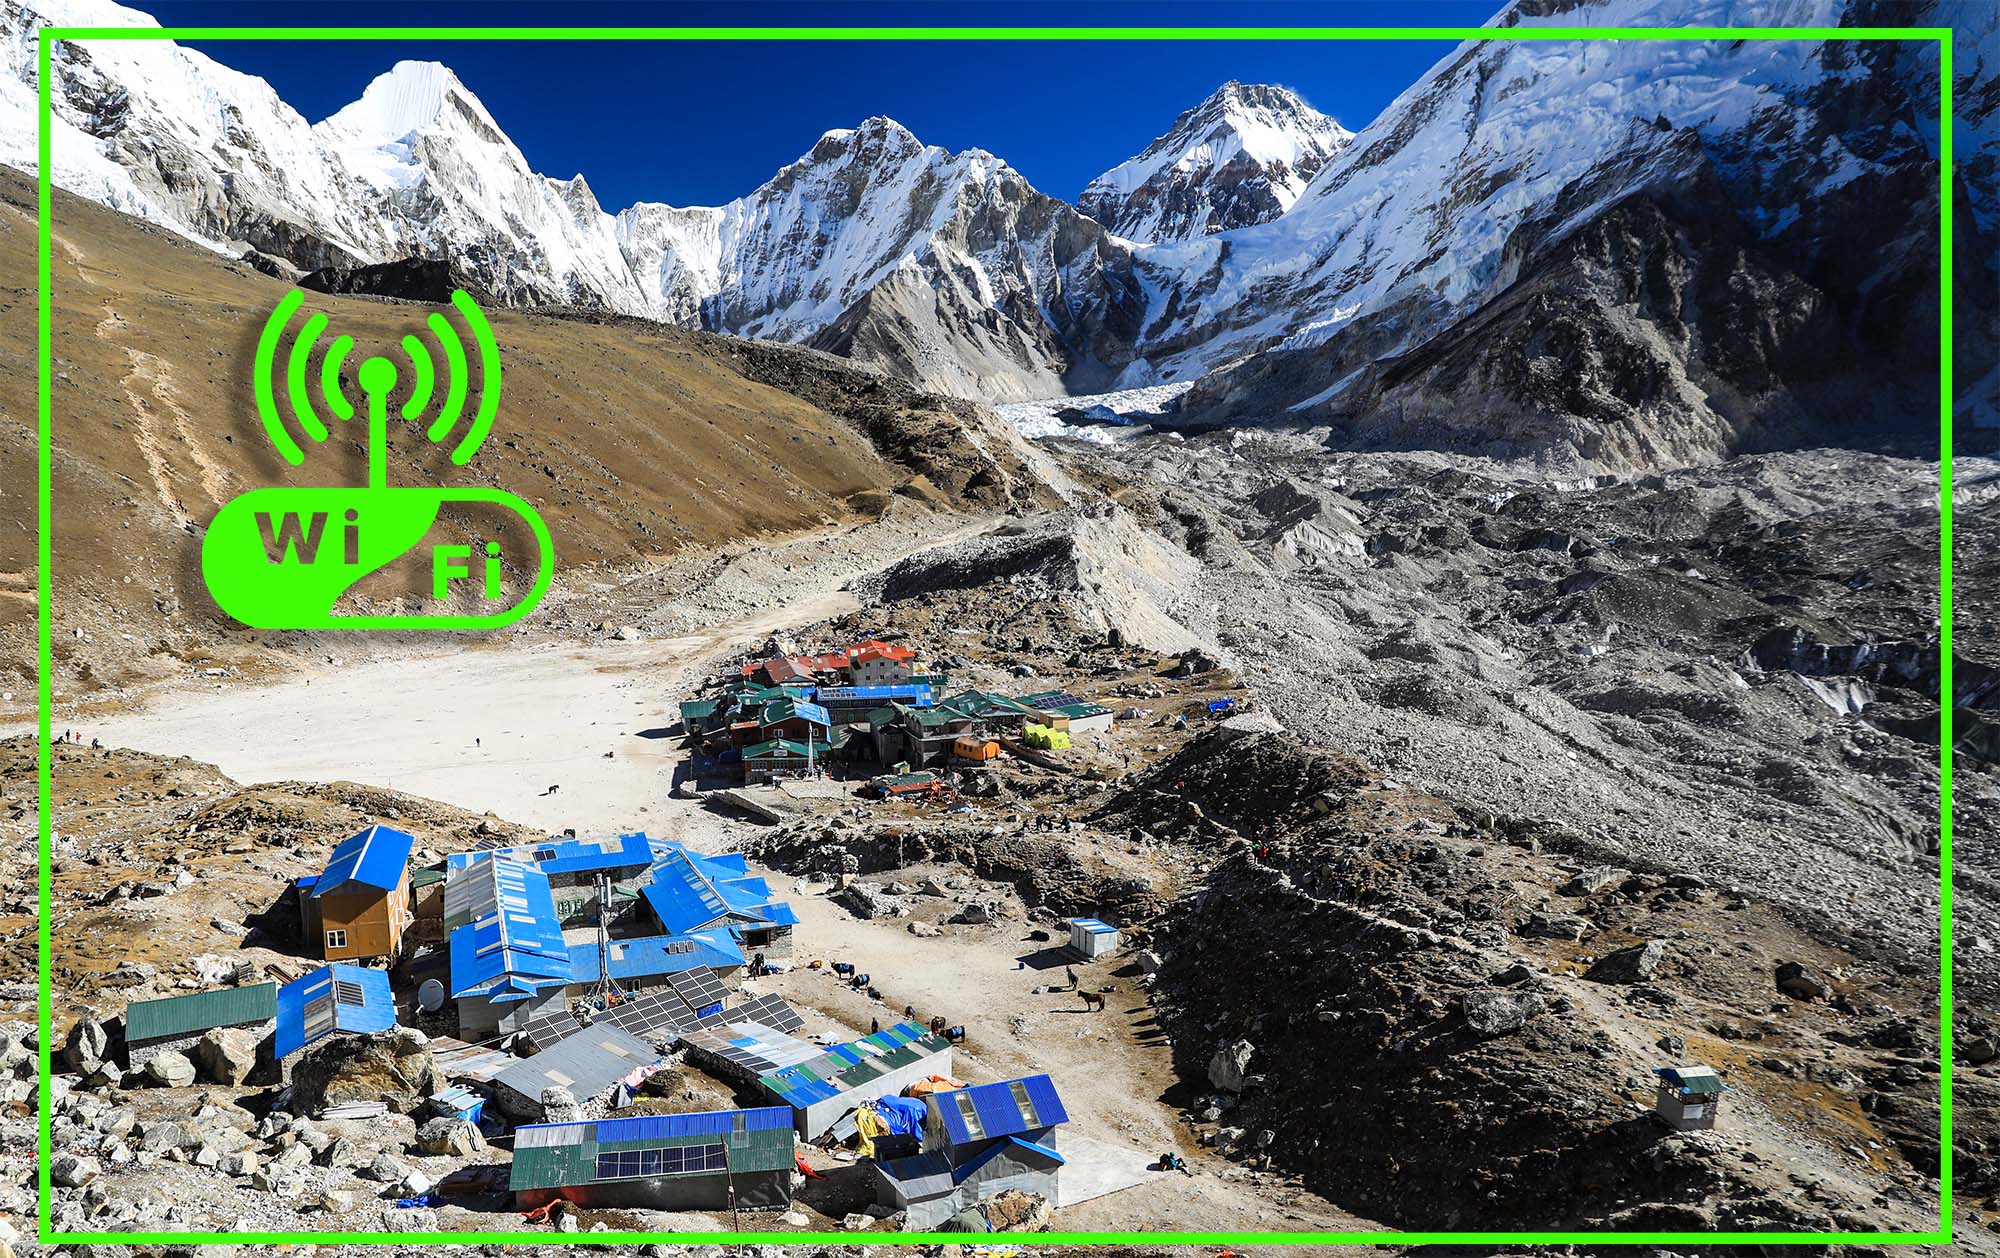 Connectivity on the Everest Base Camp Trek: Wi-Fi, Cellular, and More